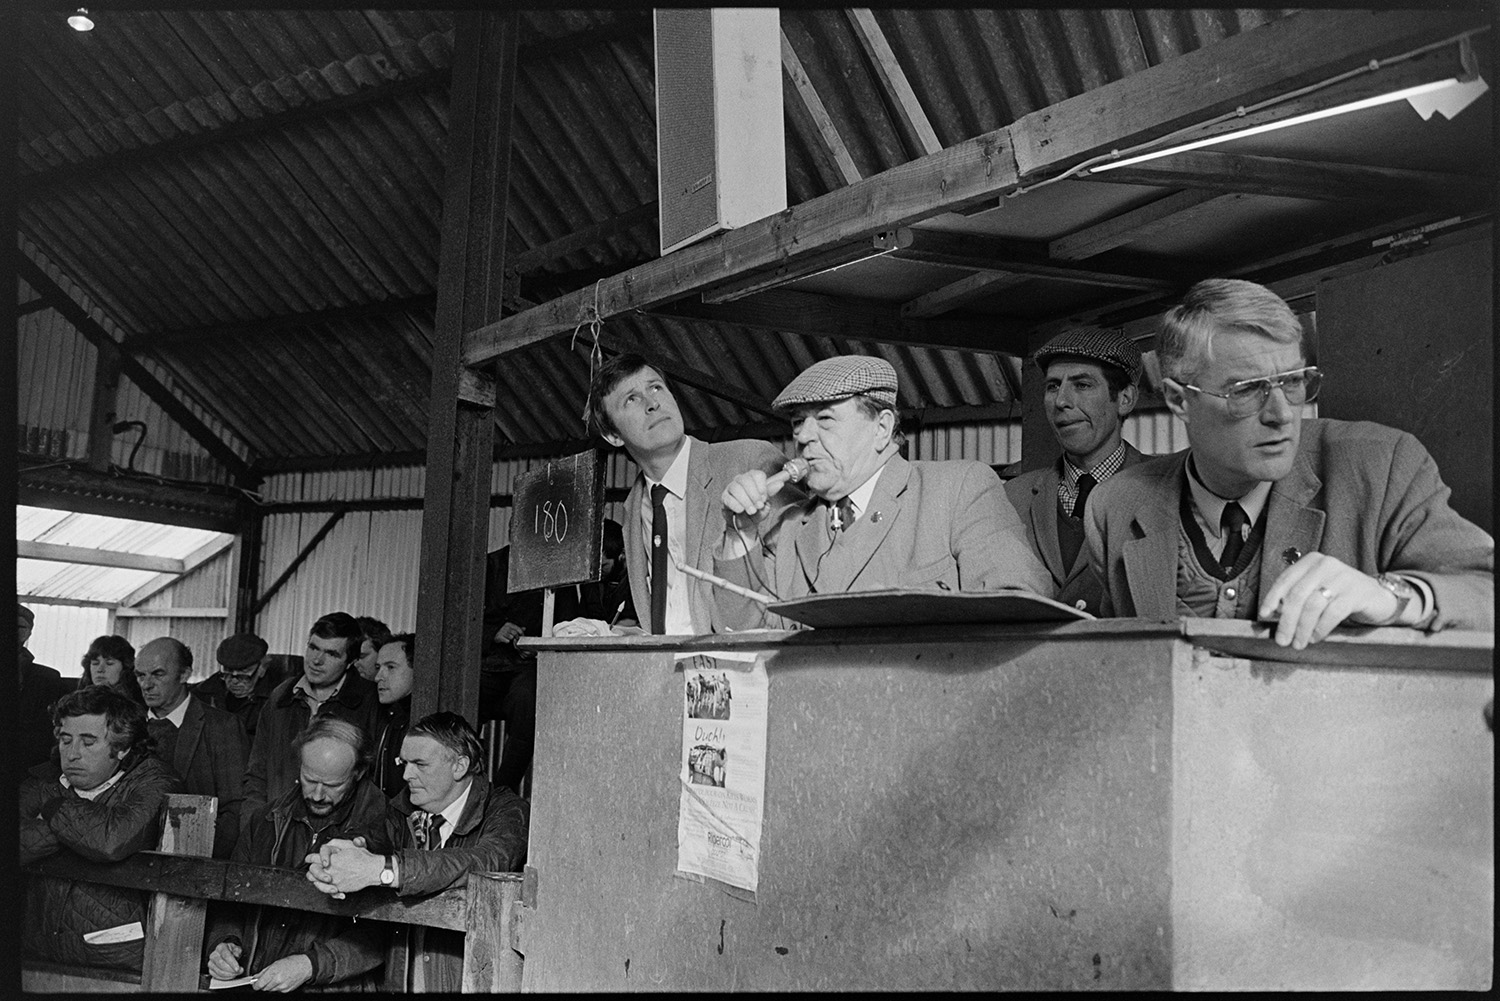 Ring at cattle market, farmers bidding, auctioneers in box. 
[Auctioneers in a box by the ring at a cattle auction near Wheddon Cross. One of them is speaking into a microphone.]